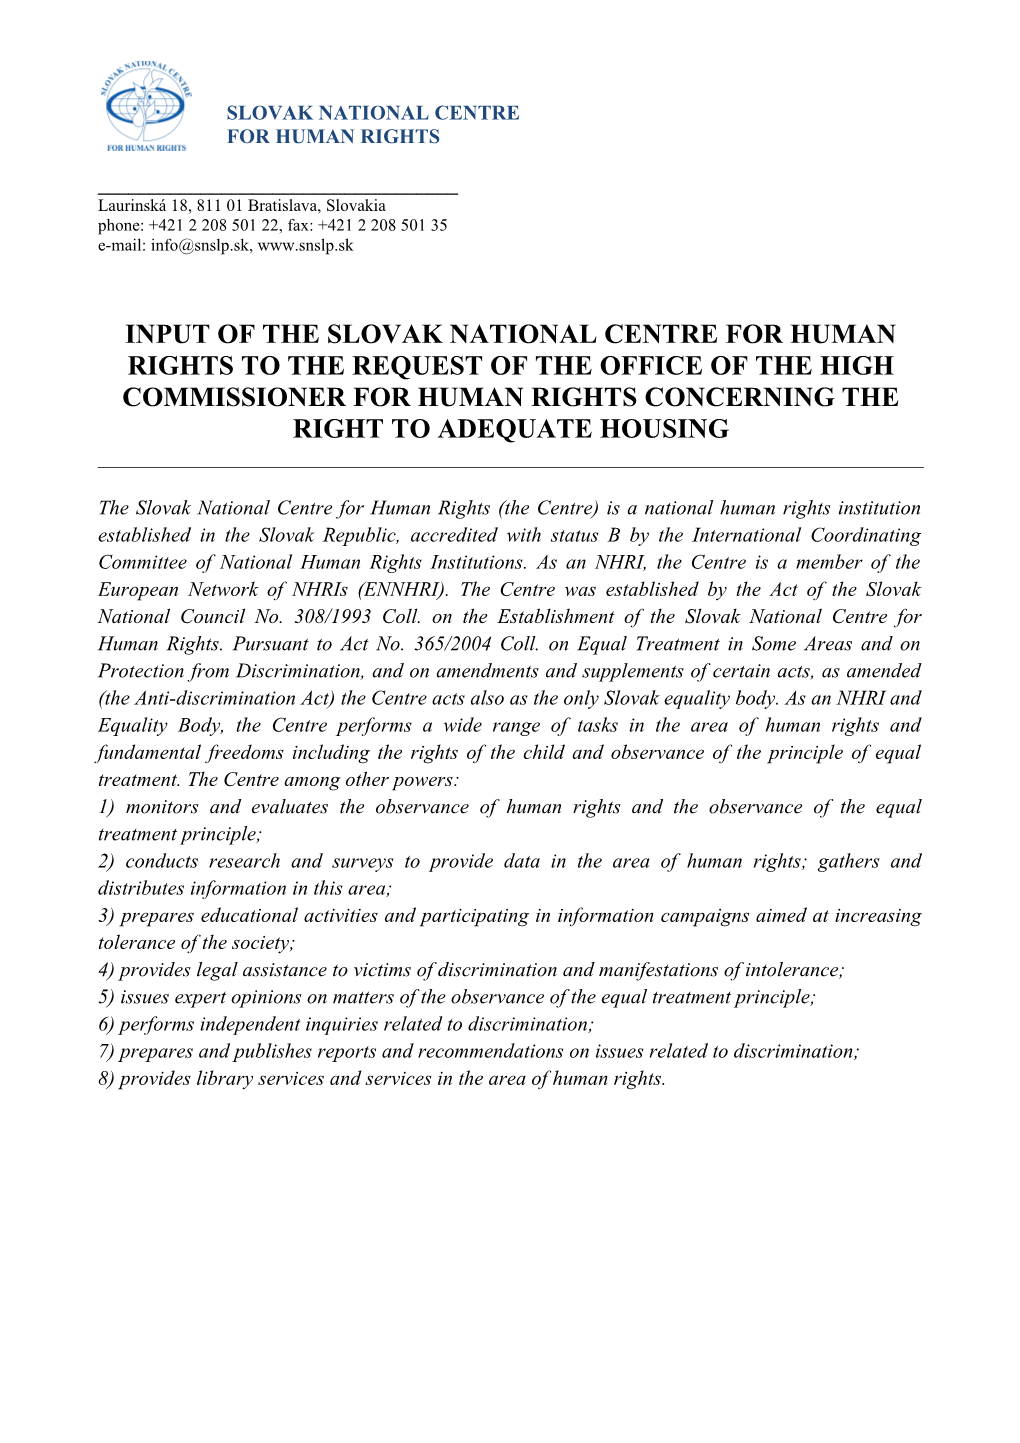 Input of the Slovak National Centre for Human Rights to the Request of the Office of The